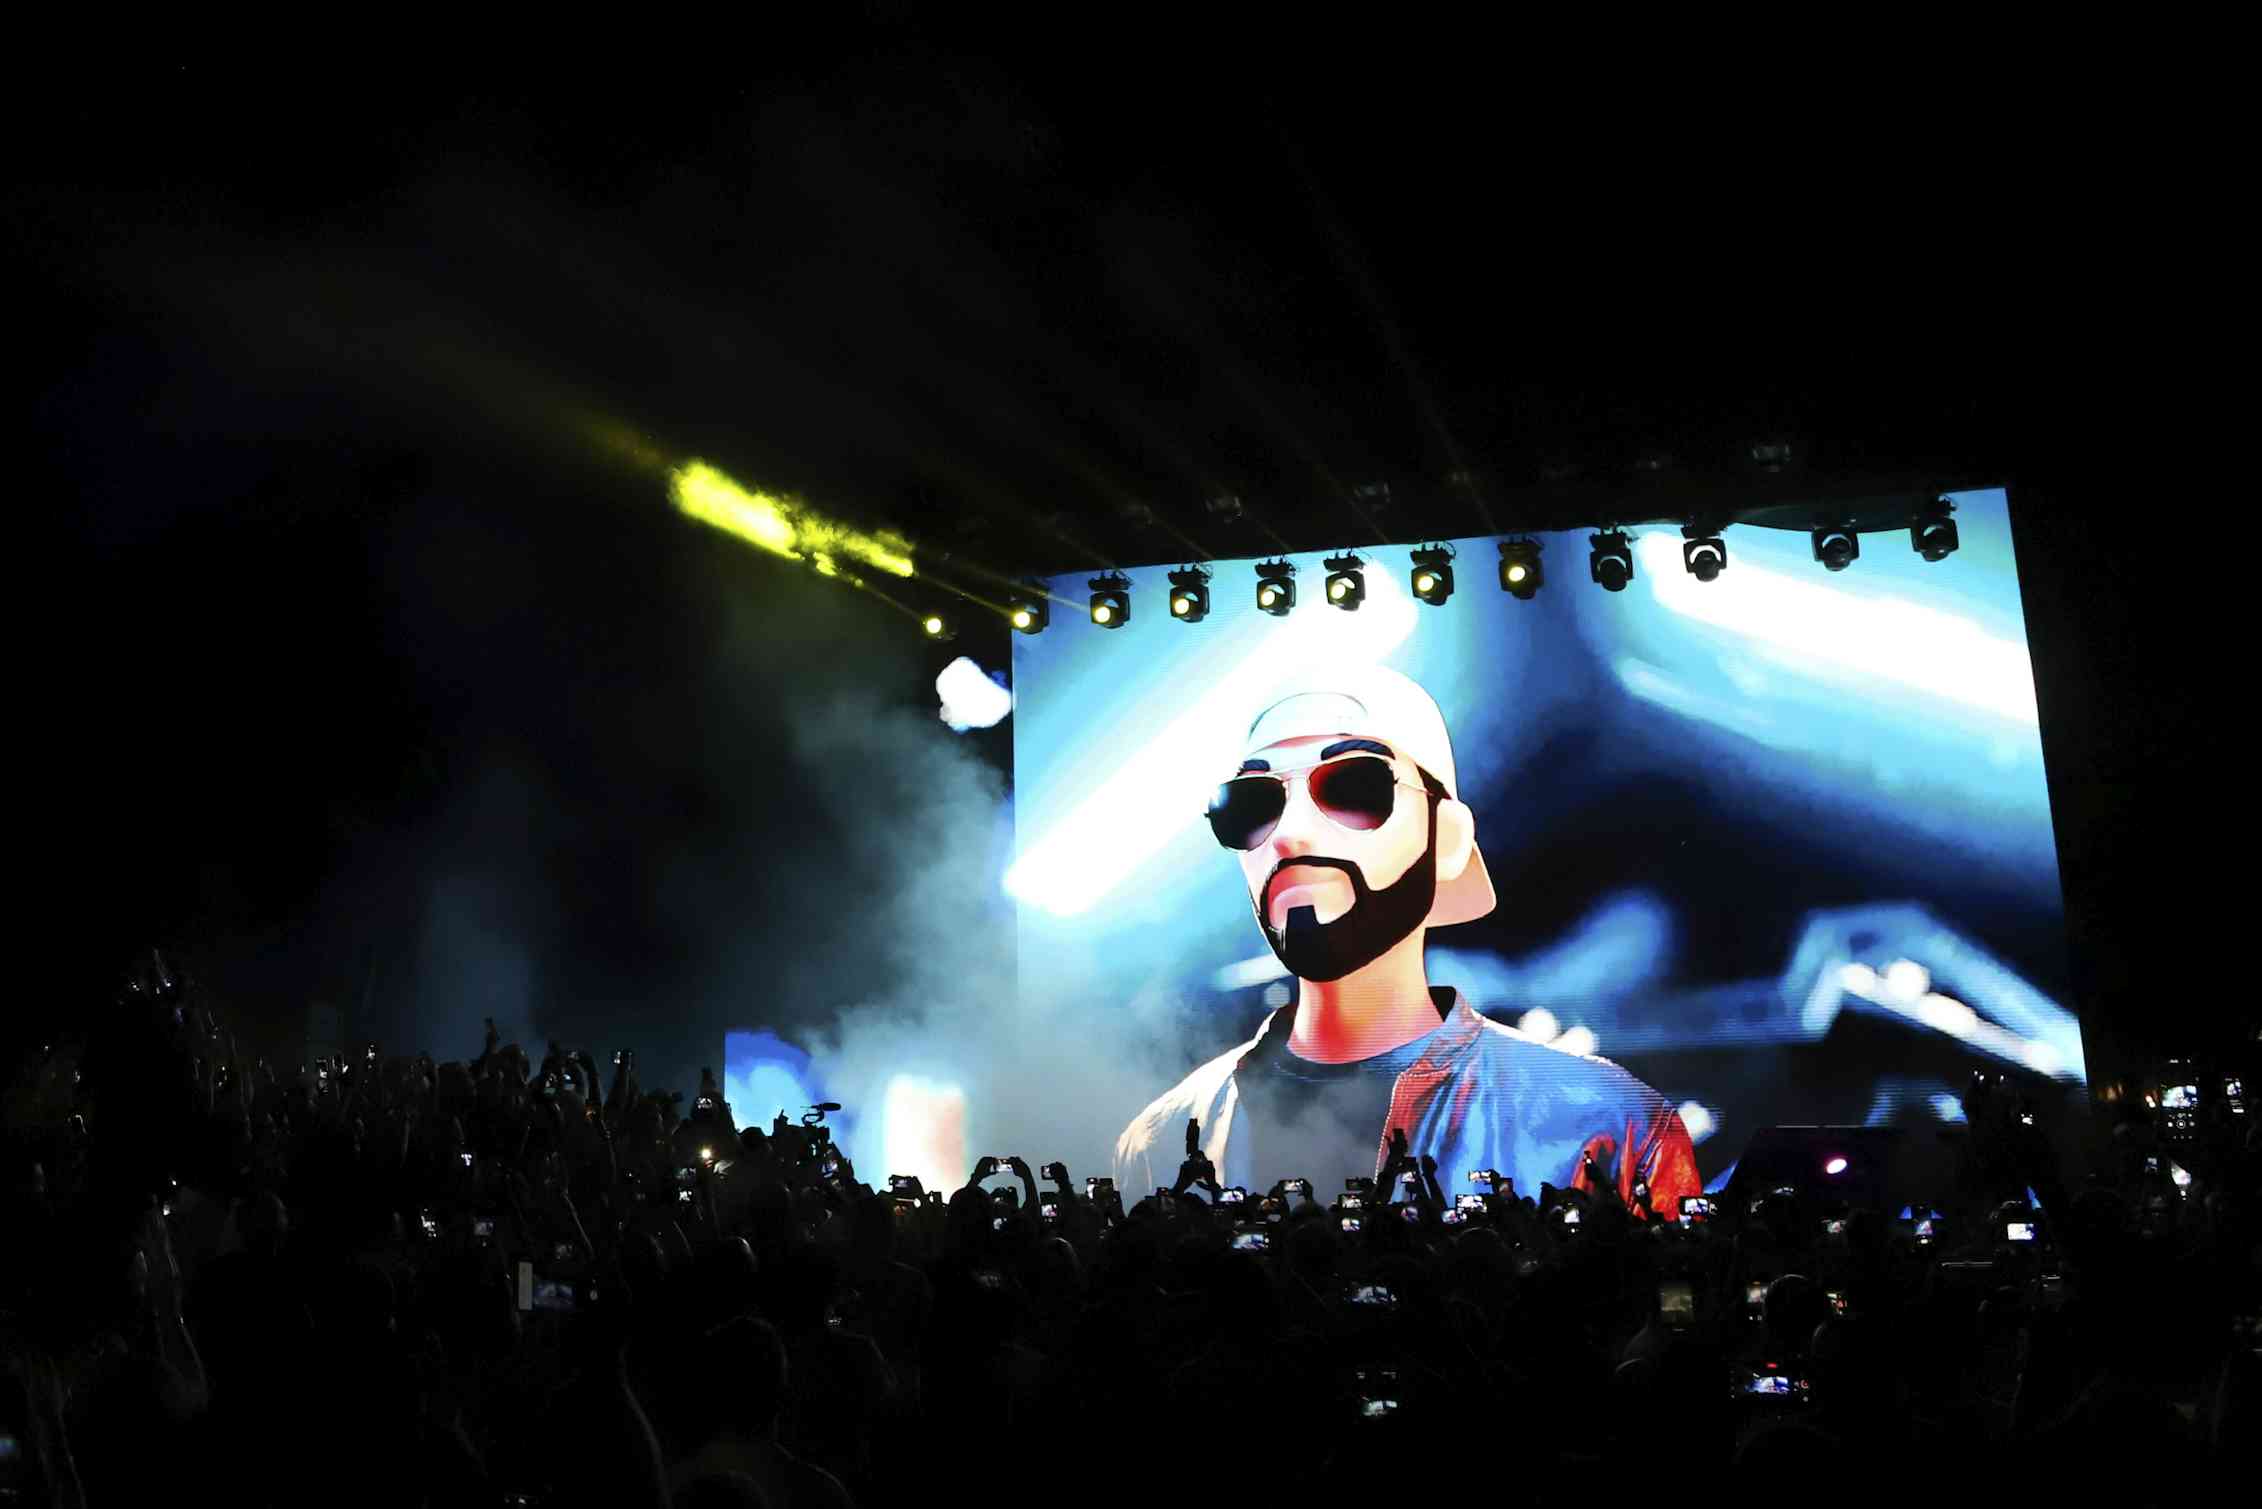 a cartoon image of a young bearded man wearing sunglasses and a backwards ball cap is projected on a wall in a darkened auditorium